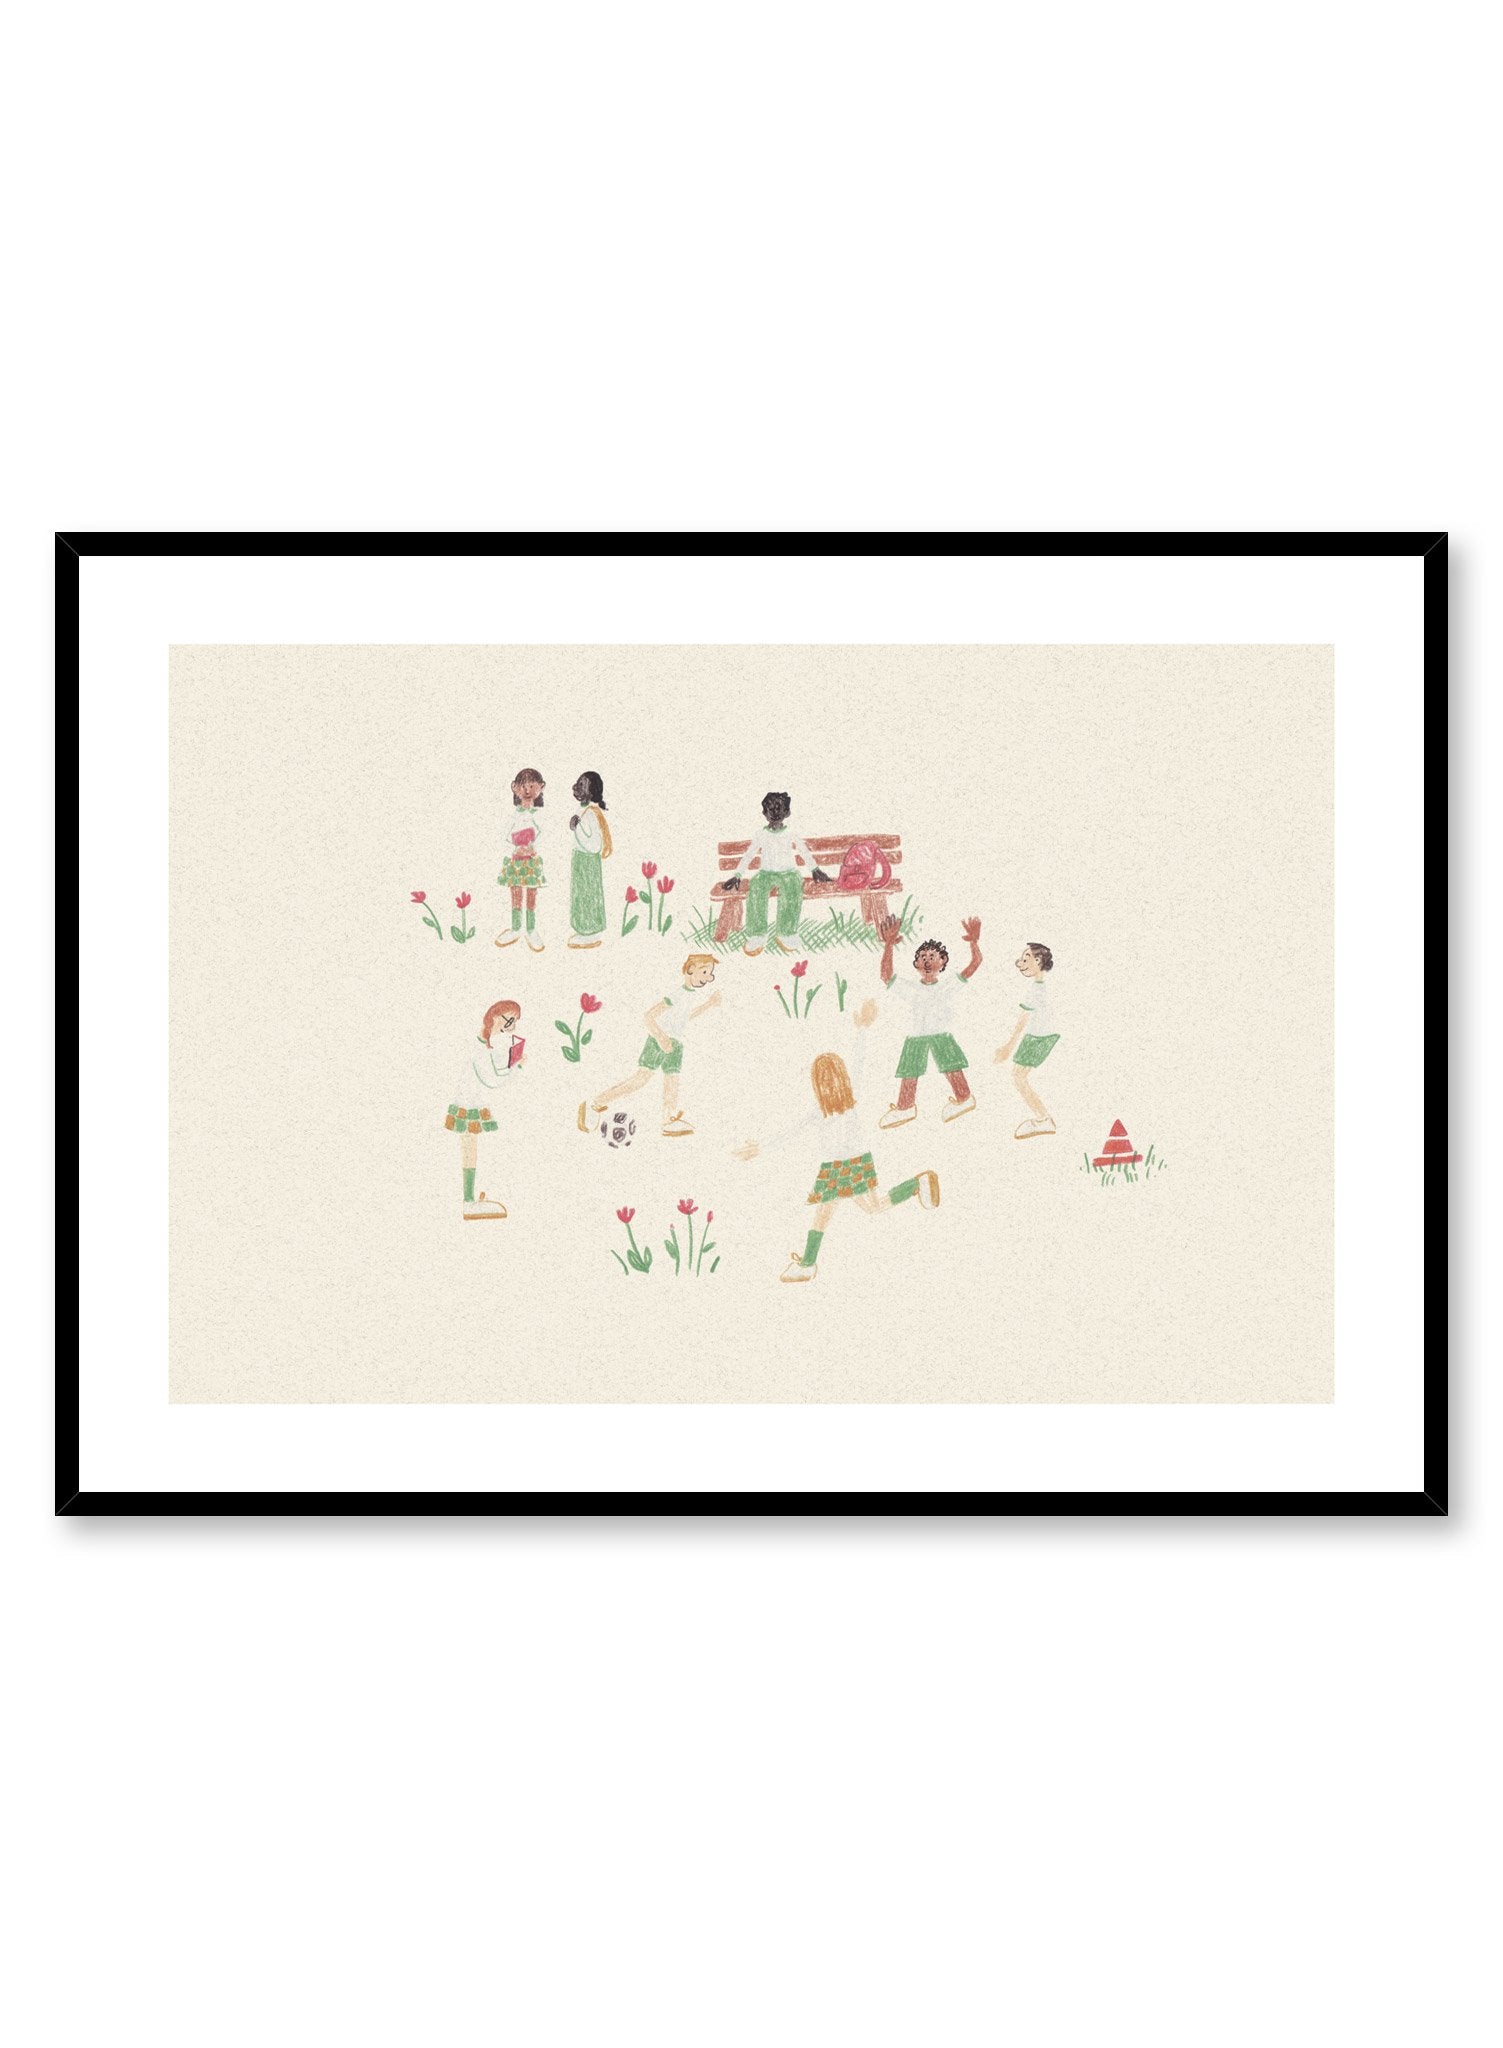 Recess is a minimalist illustration by Opposite Wall of students in school uniforms playing outside during recess.